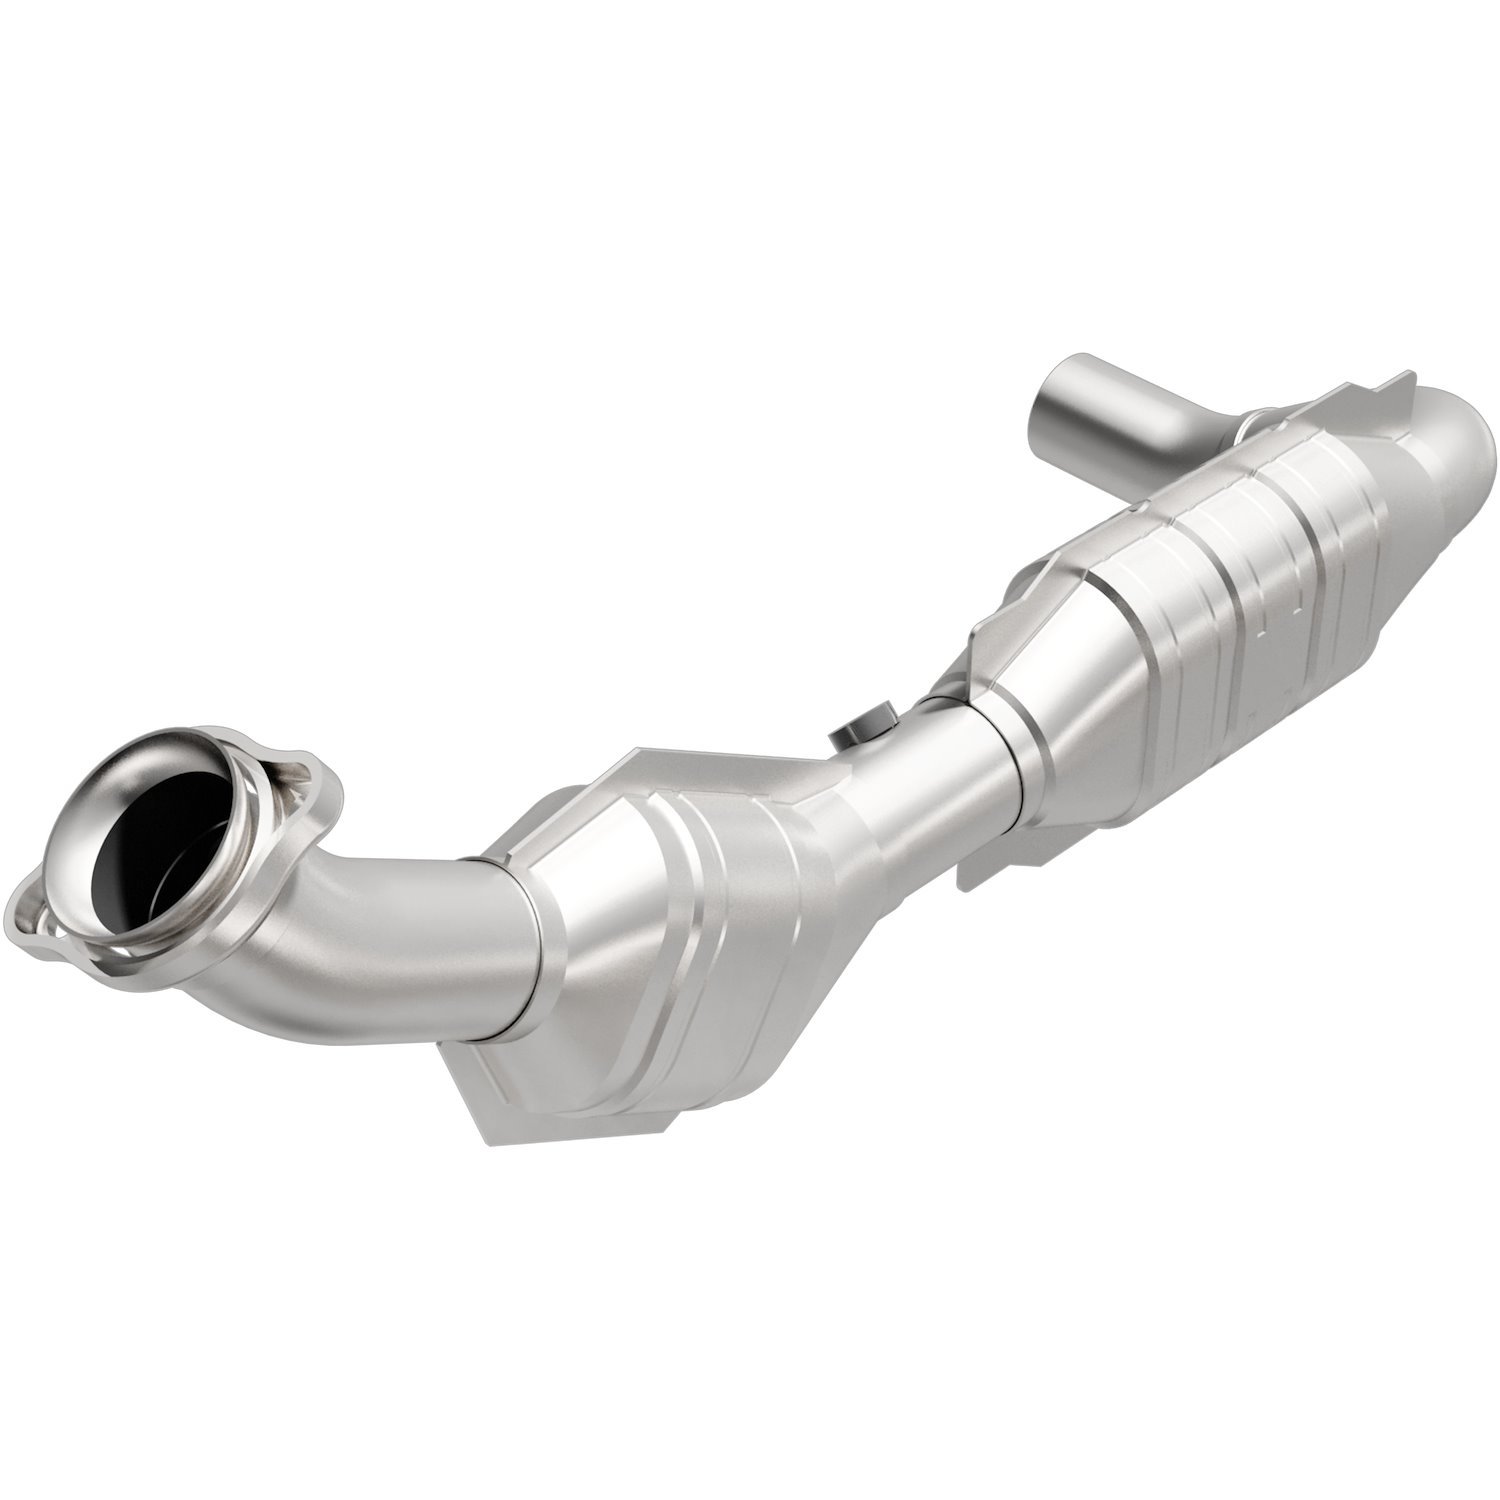 Direct-Fit Catalytic Converter 2003-04 Expedition 4.6L/5.4L with LEV/ULEV